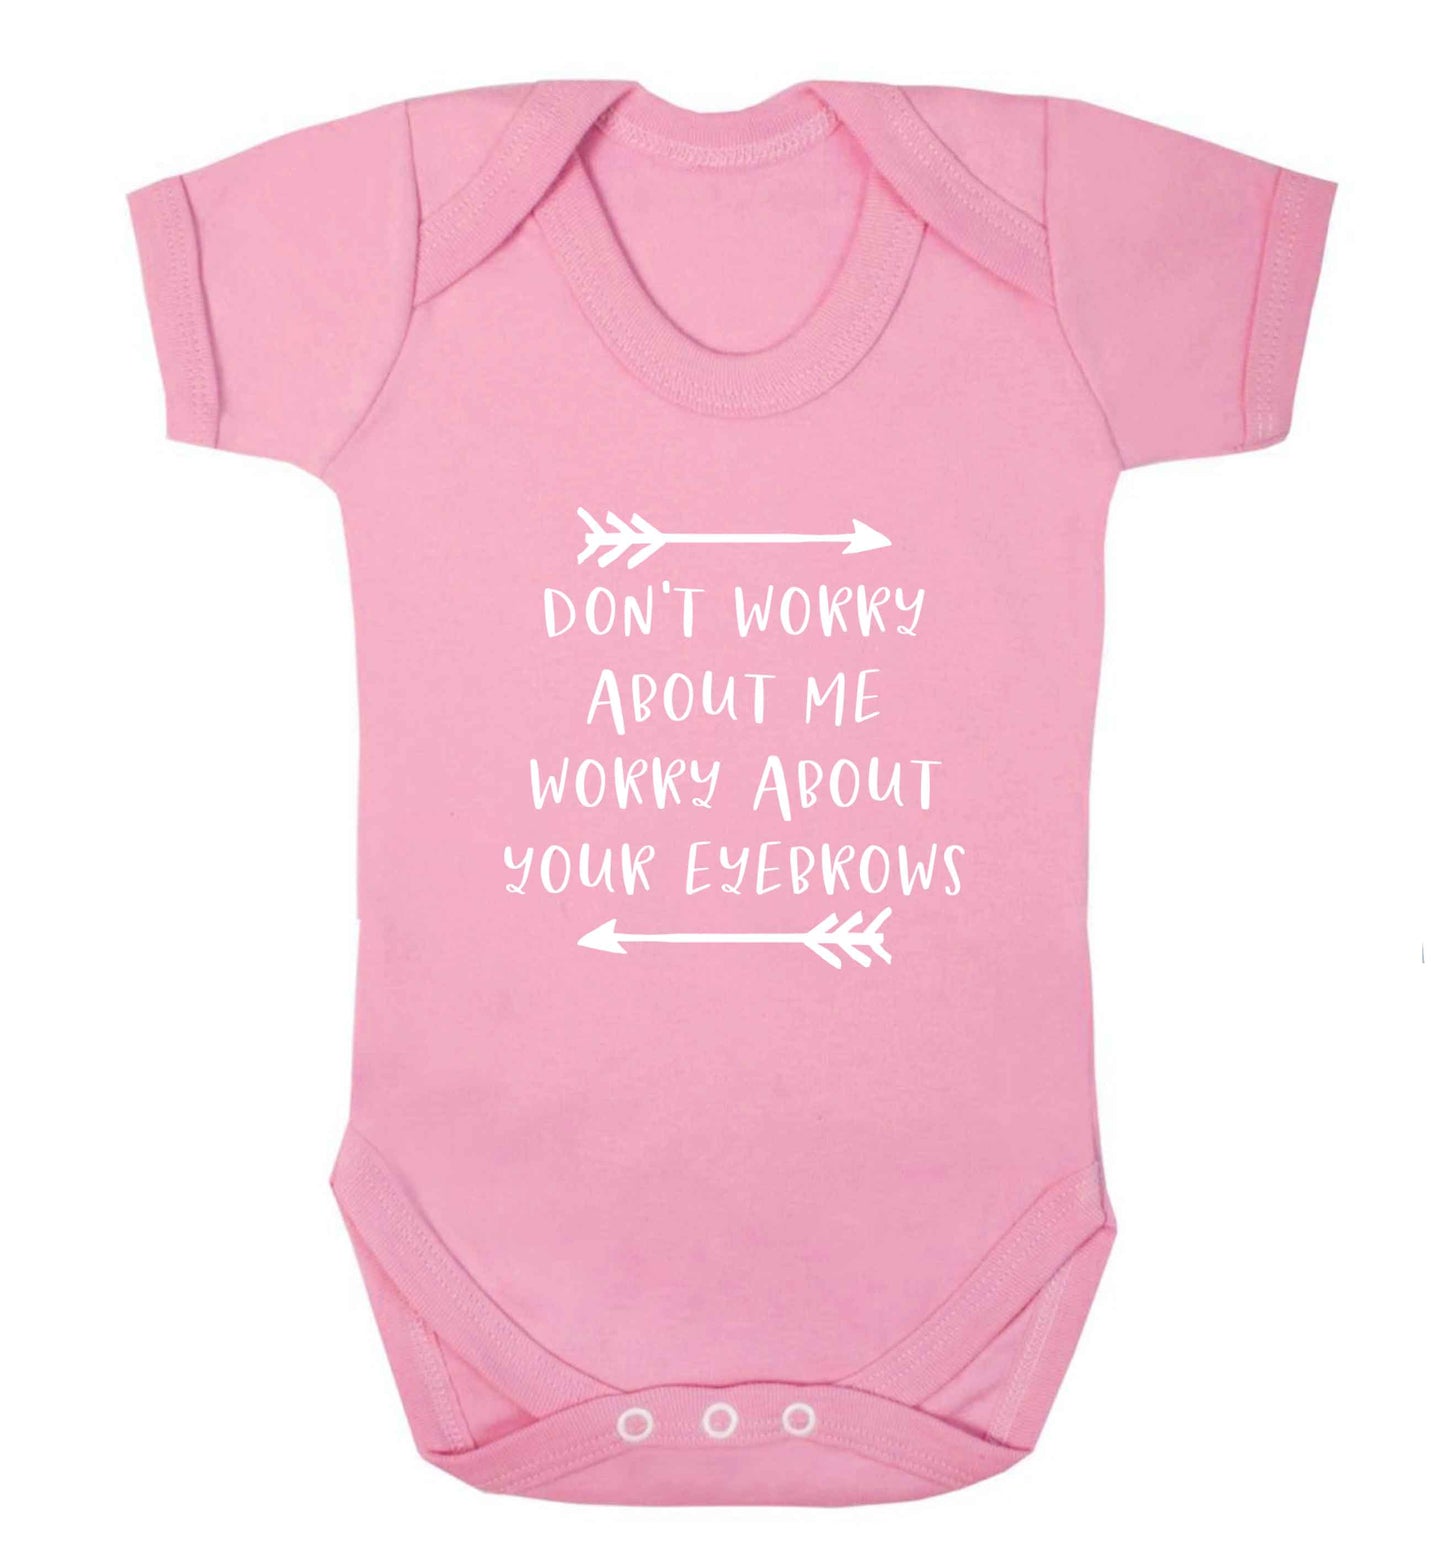 Don't worry about me worry about your eyebrows baby vest pale pink 18-24 months